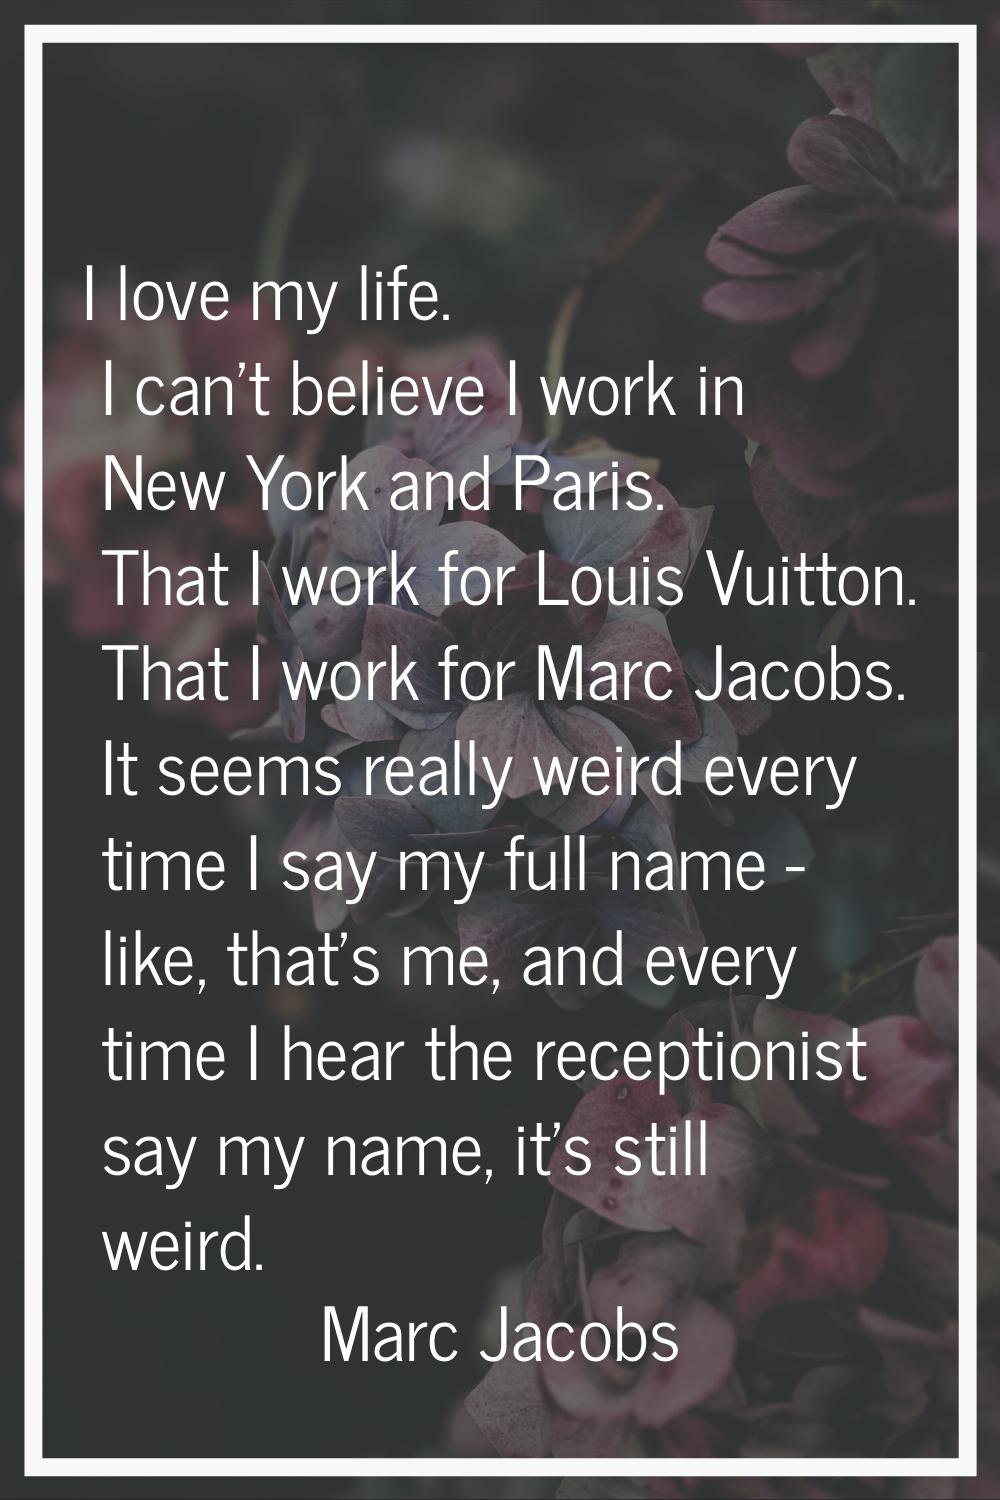 I love my life. I can't believe I work in New York and Paris. That I work for Louis Vuitton. That I